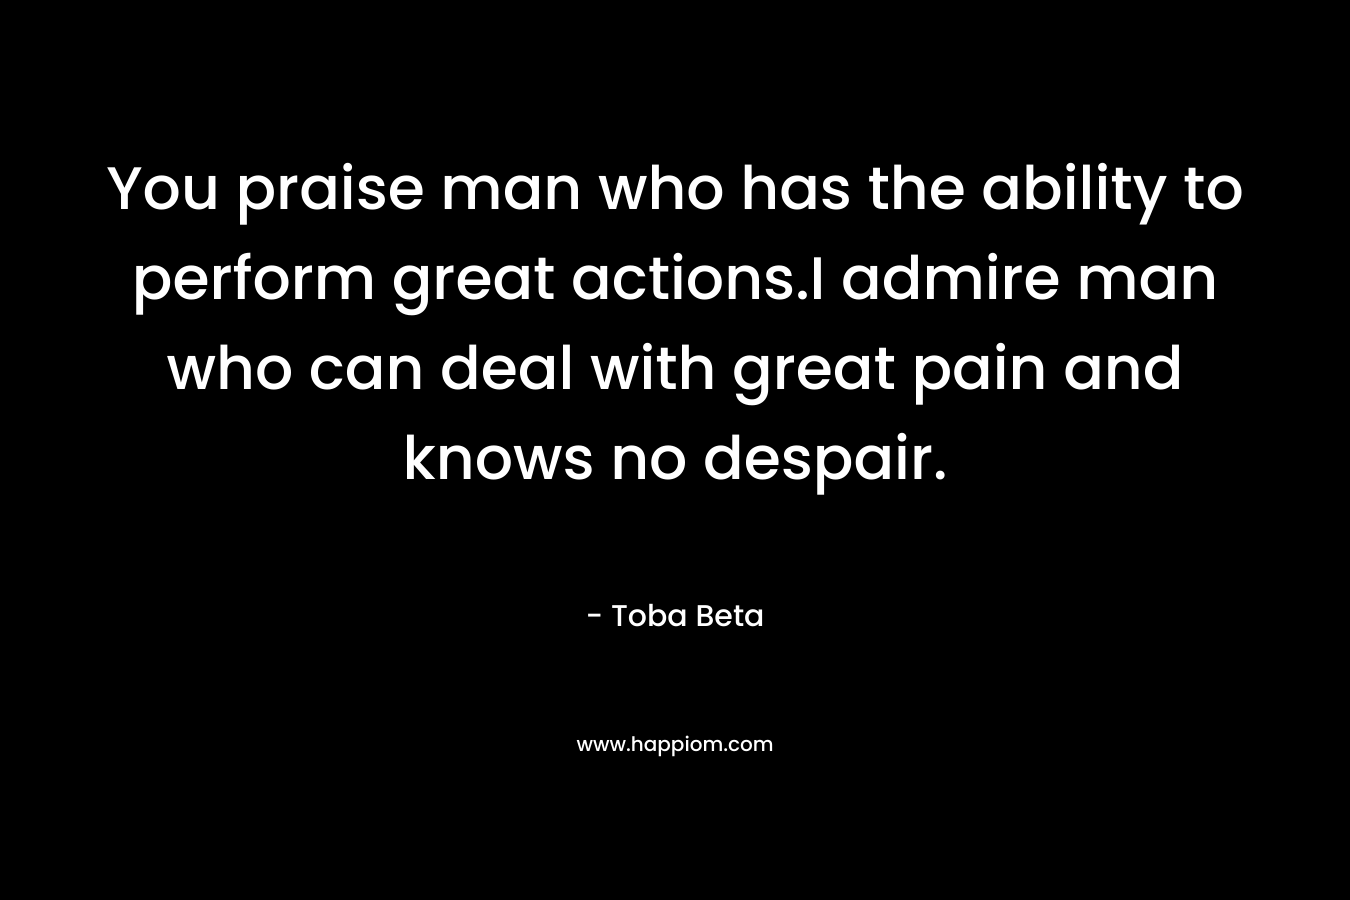 You praise man who has the ability to perform great actions.I admire man who can deal with great pain and knows no despair.